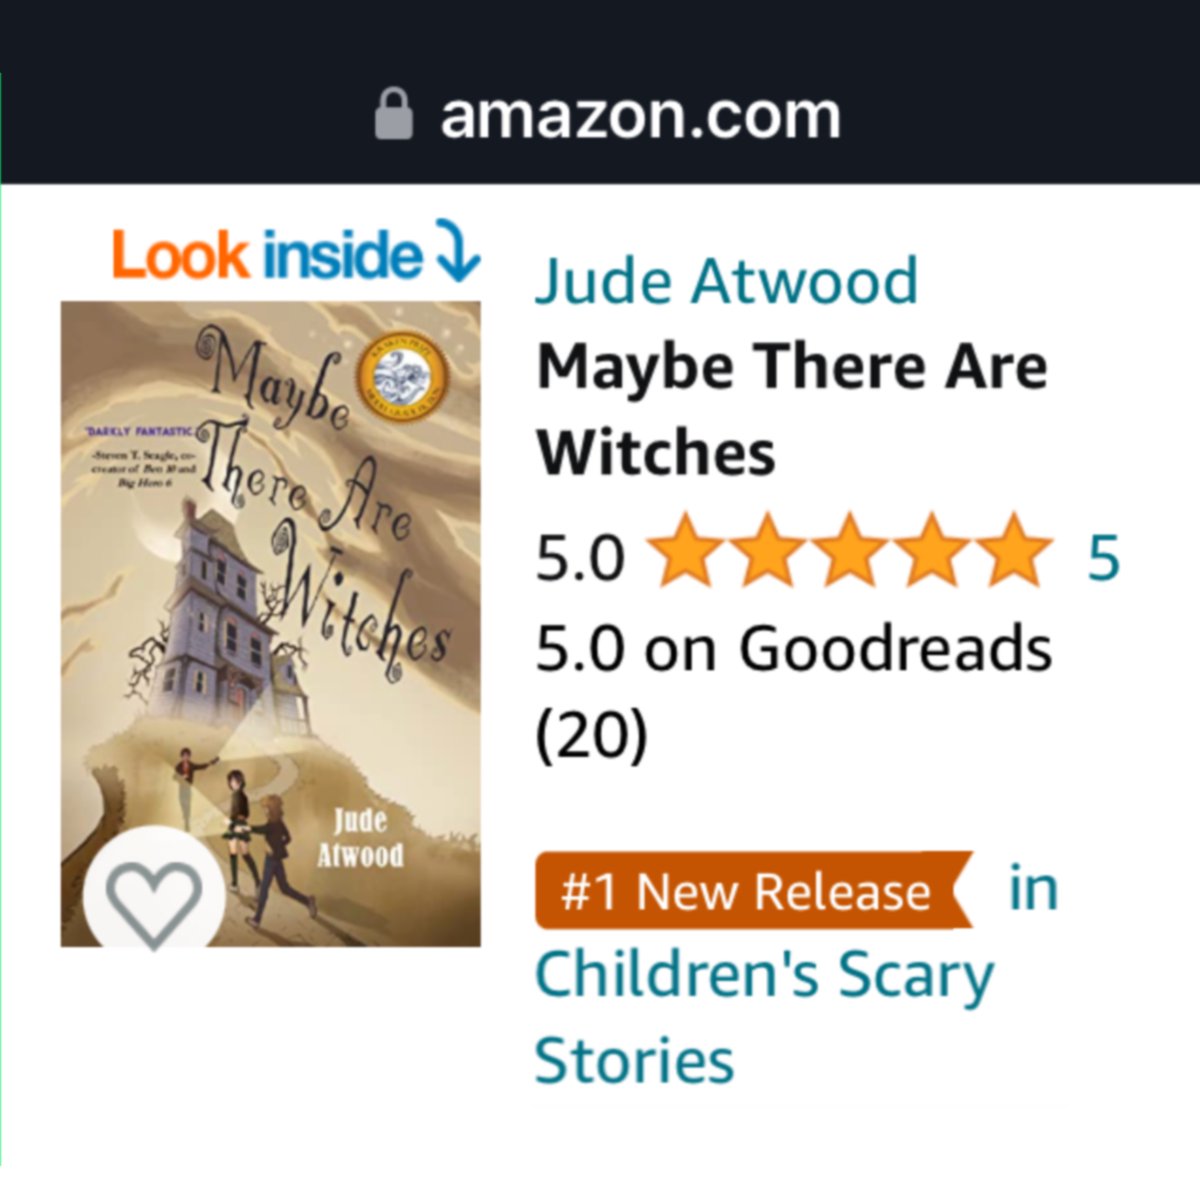 Ever since I was in 3rd grade, I’ve wanted to write kids’ books.

It took me a while, but I’m finally living that dream. Today my book was the #1 new release in Children’s Scary Stories on the world’s top retail site.

Thanks to all the wonderful readers who helped it get there!